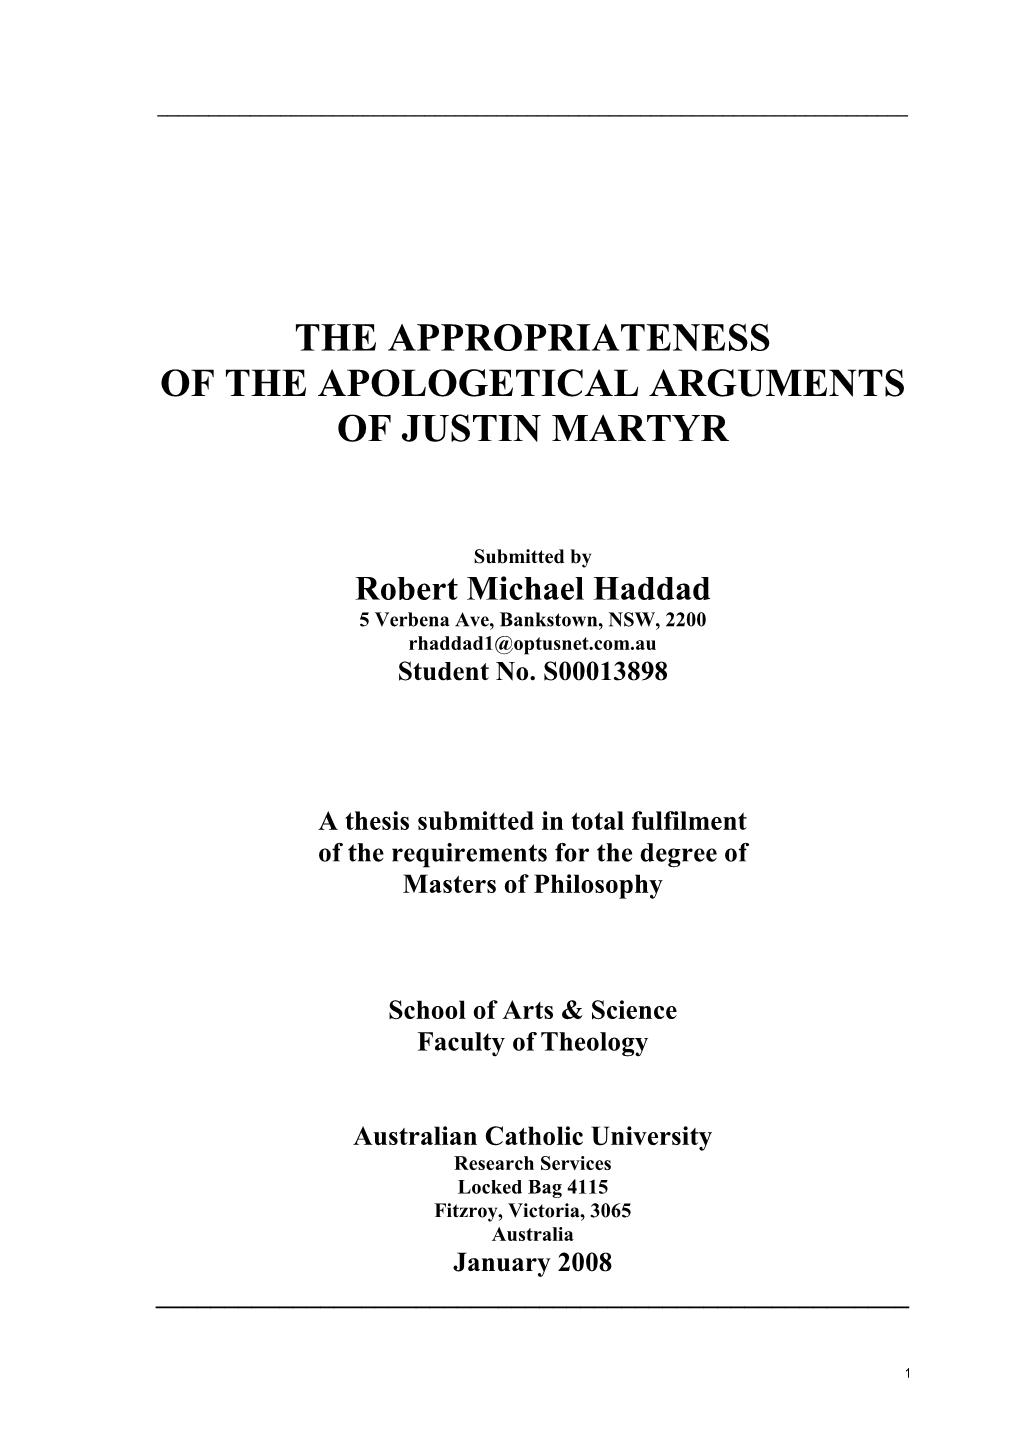 The Appropriateness of the Apologetical Arguments of Justin Martyr